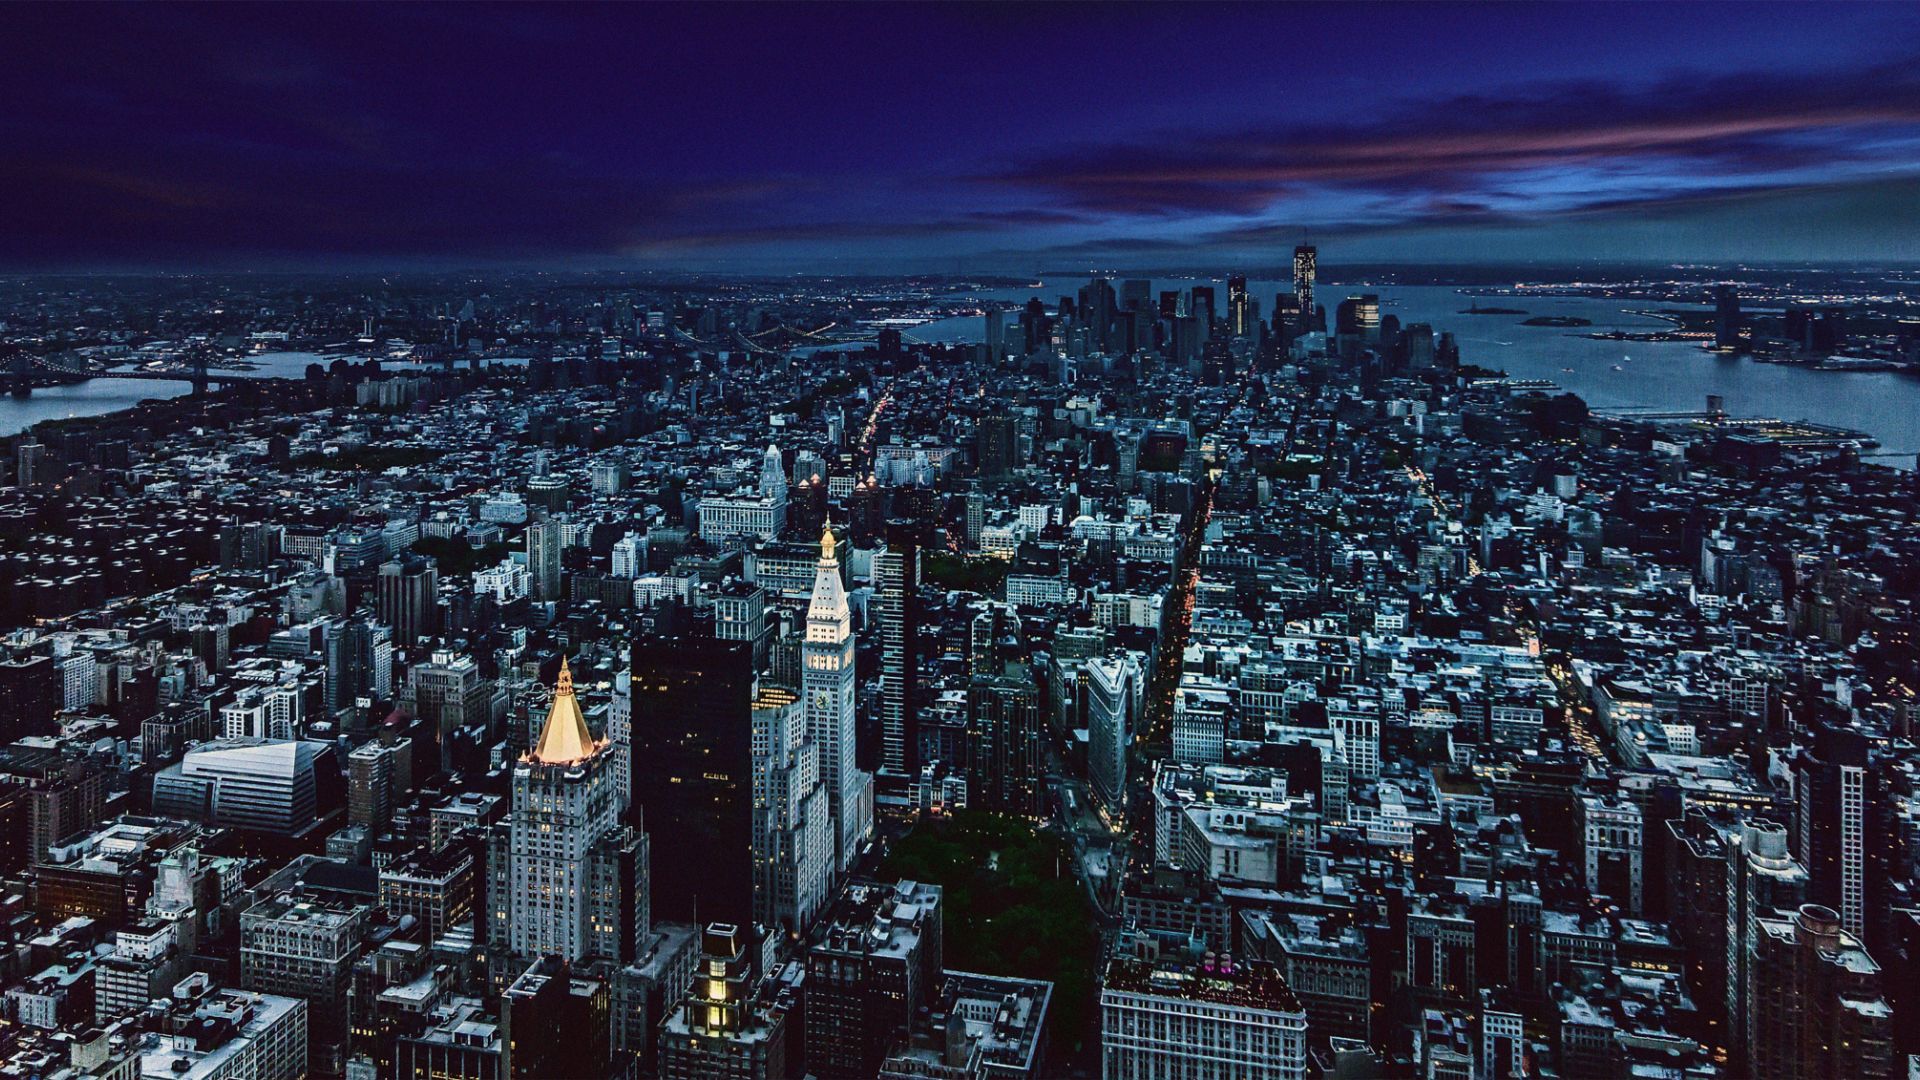 Desktop Wallpaper New York City, Night, Aerial View, HD Image, Picture, Background, S8jq X